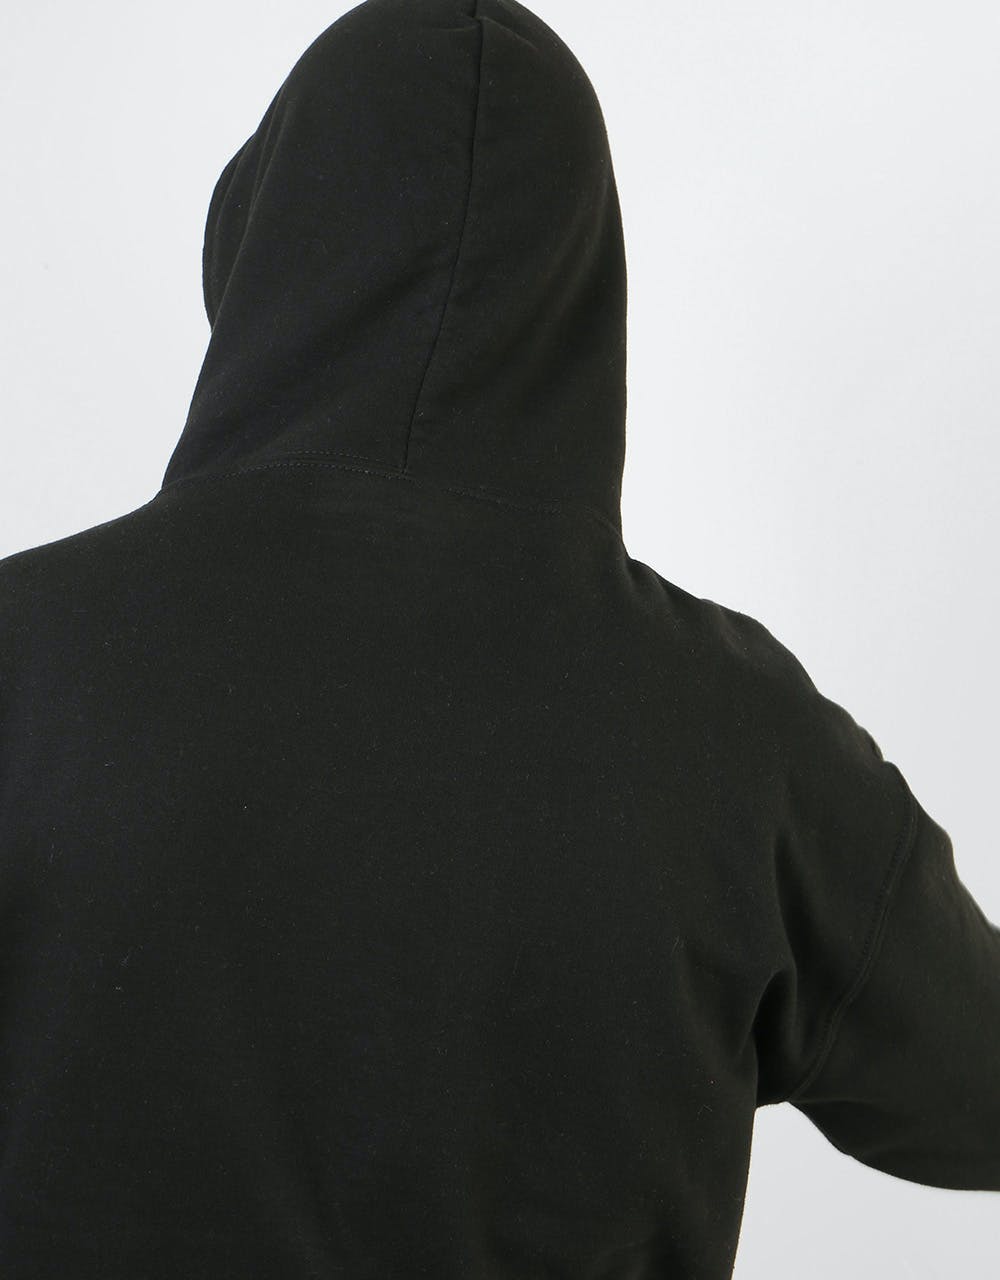 Route One Forever Pullover Hoodie - Black